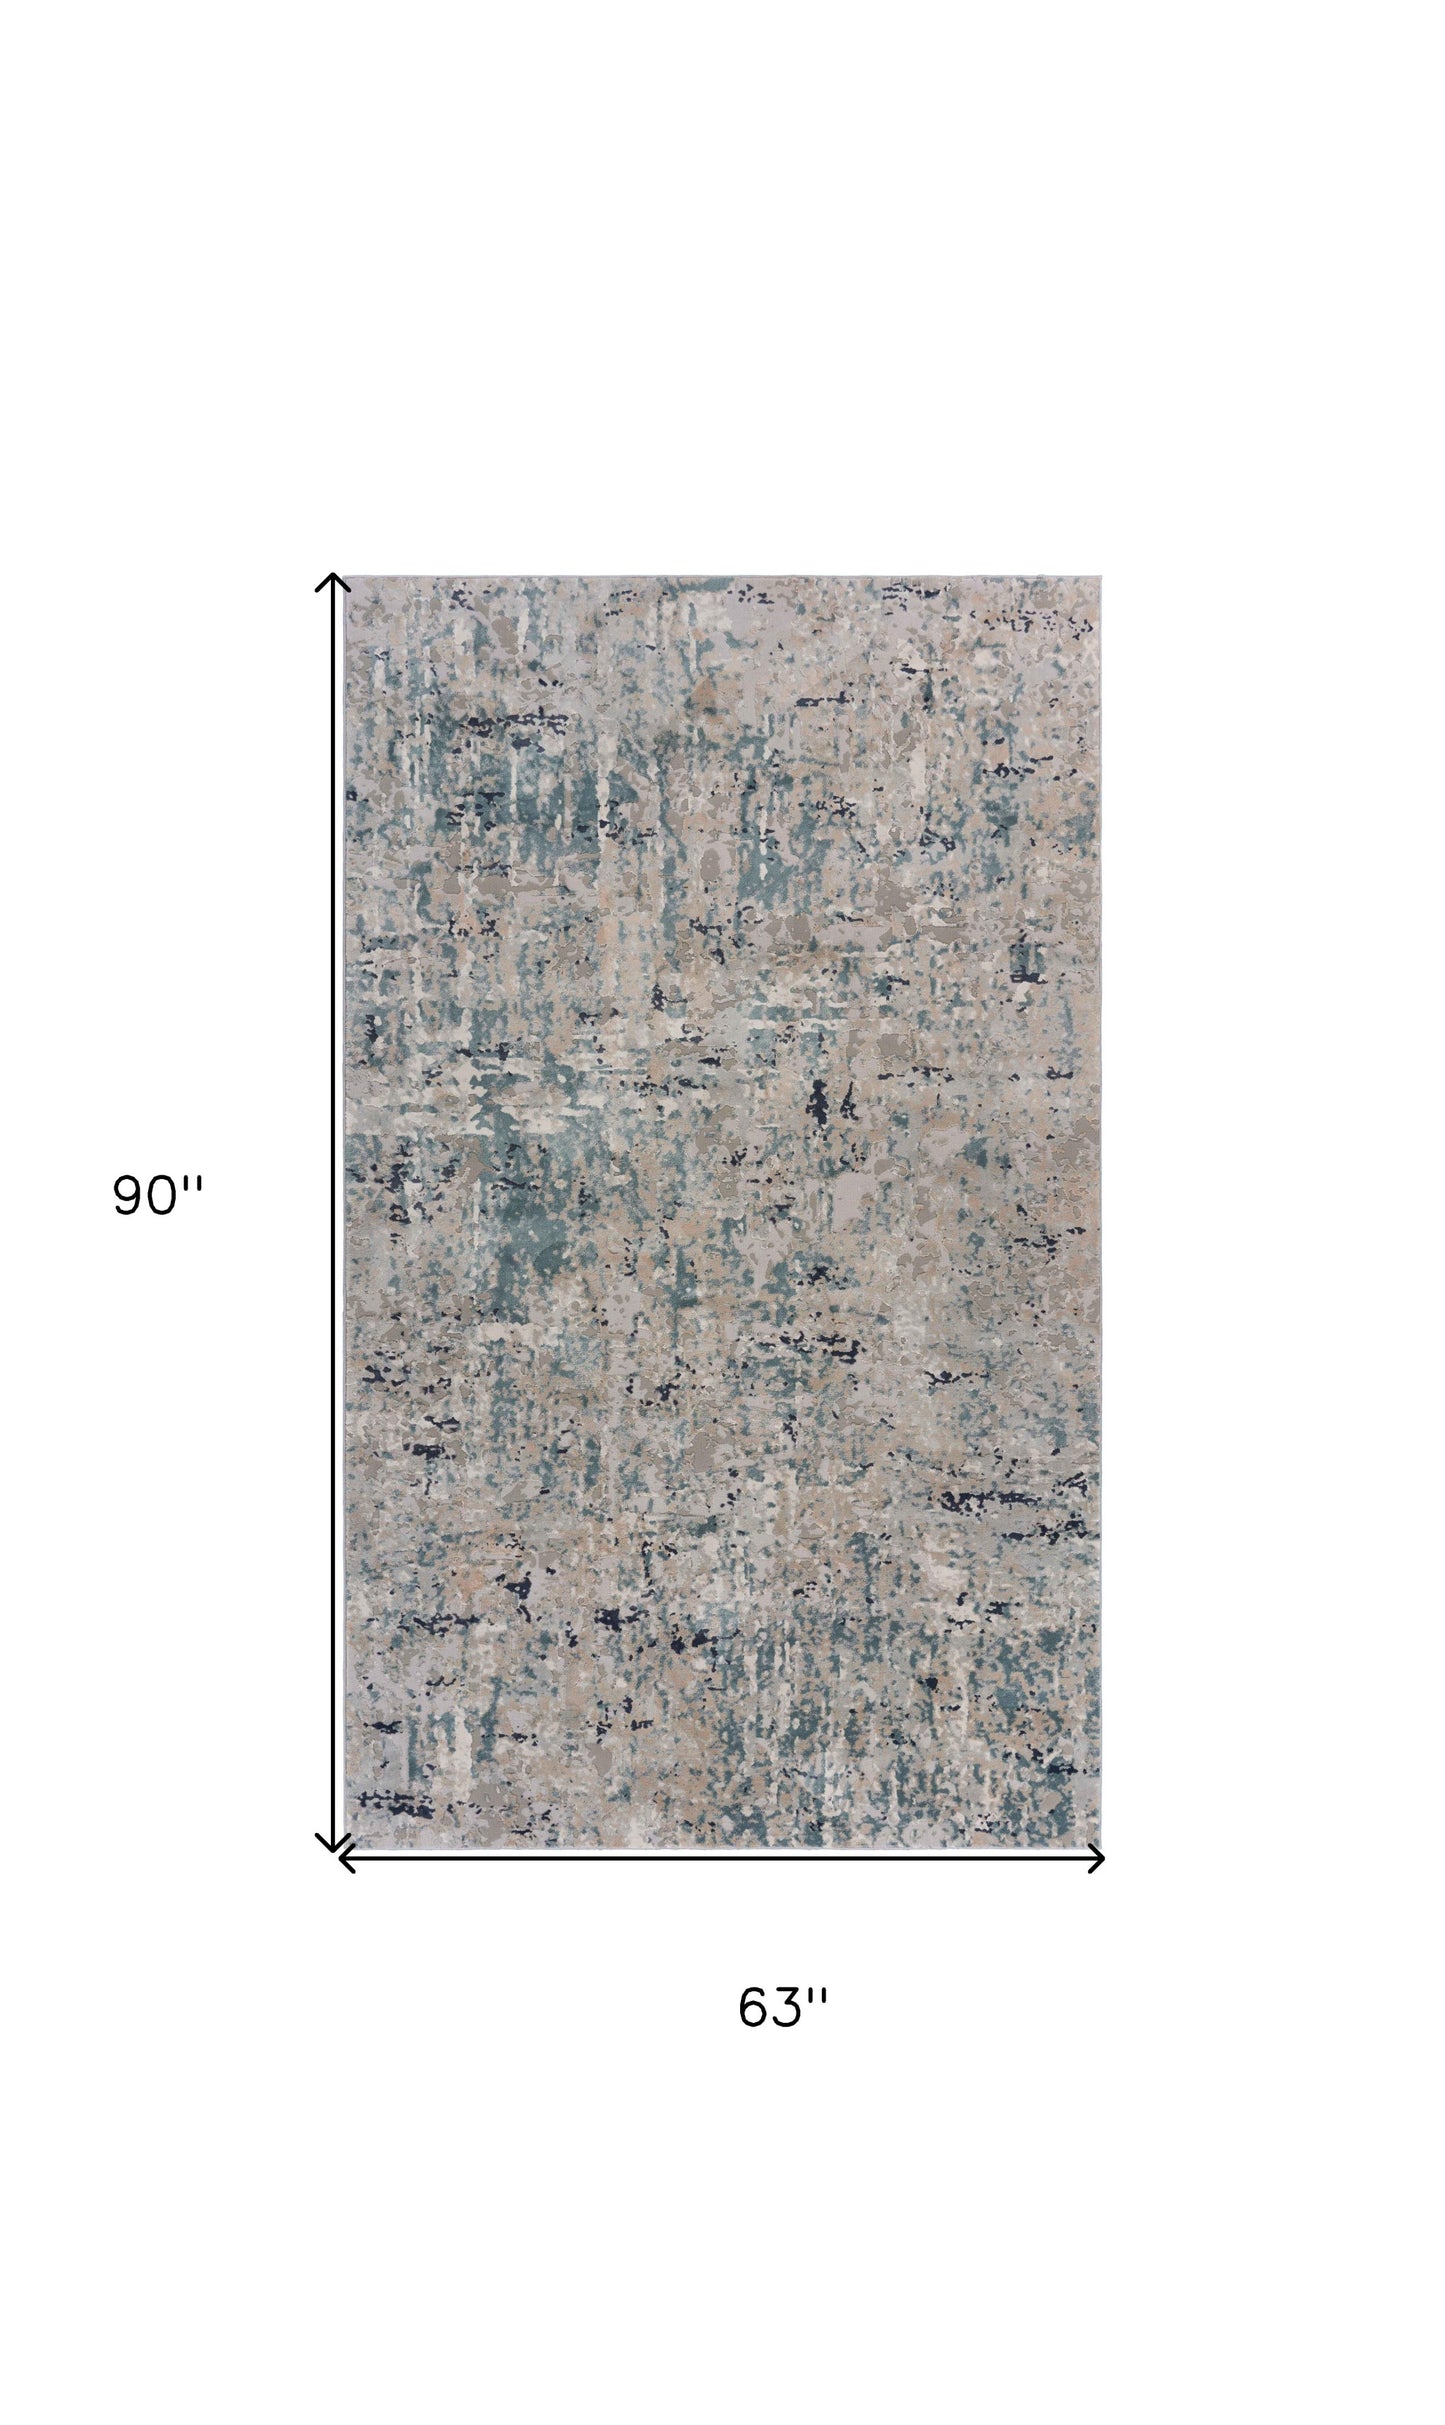 5' X 8' Gray Blue Taupe And Cream Abstract Distressed Stain Resistant Area Rug